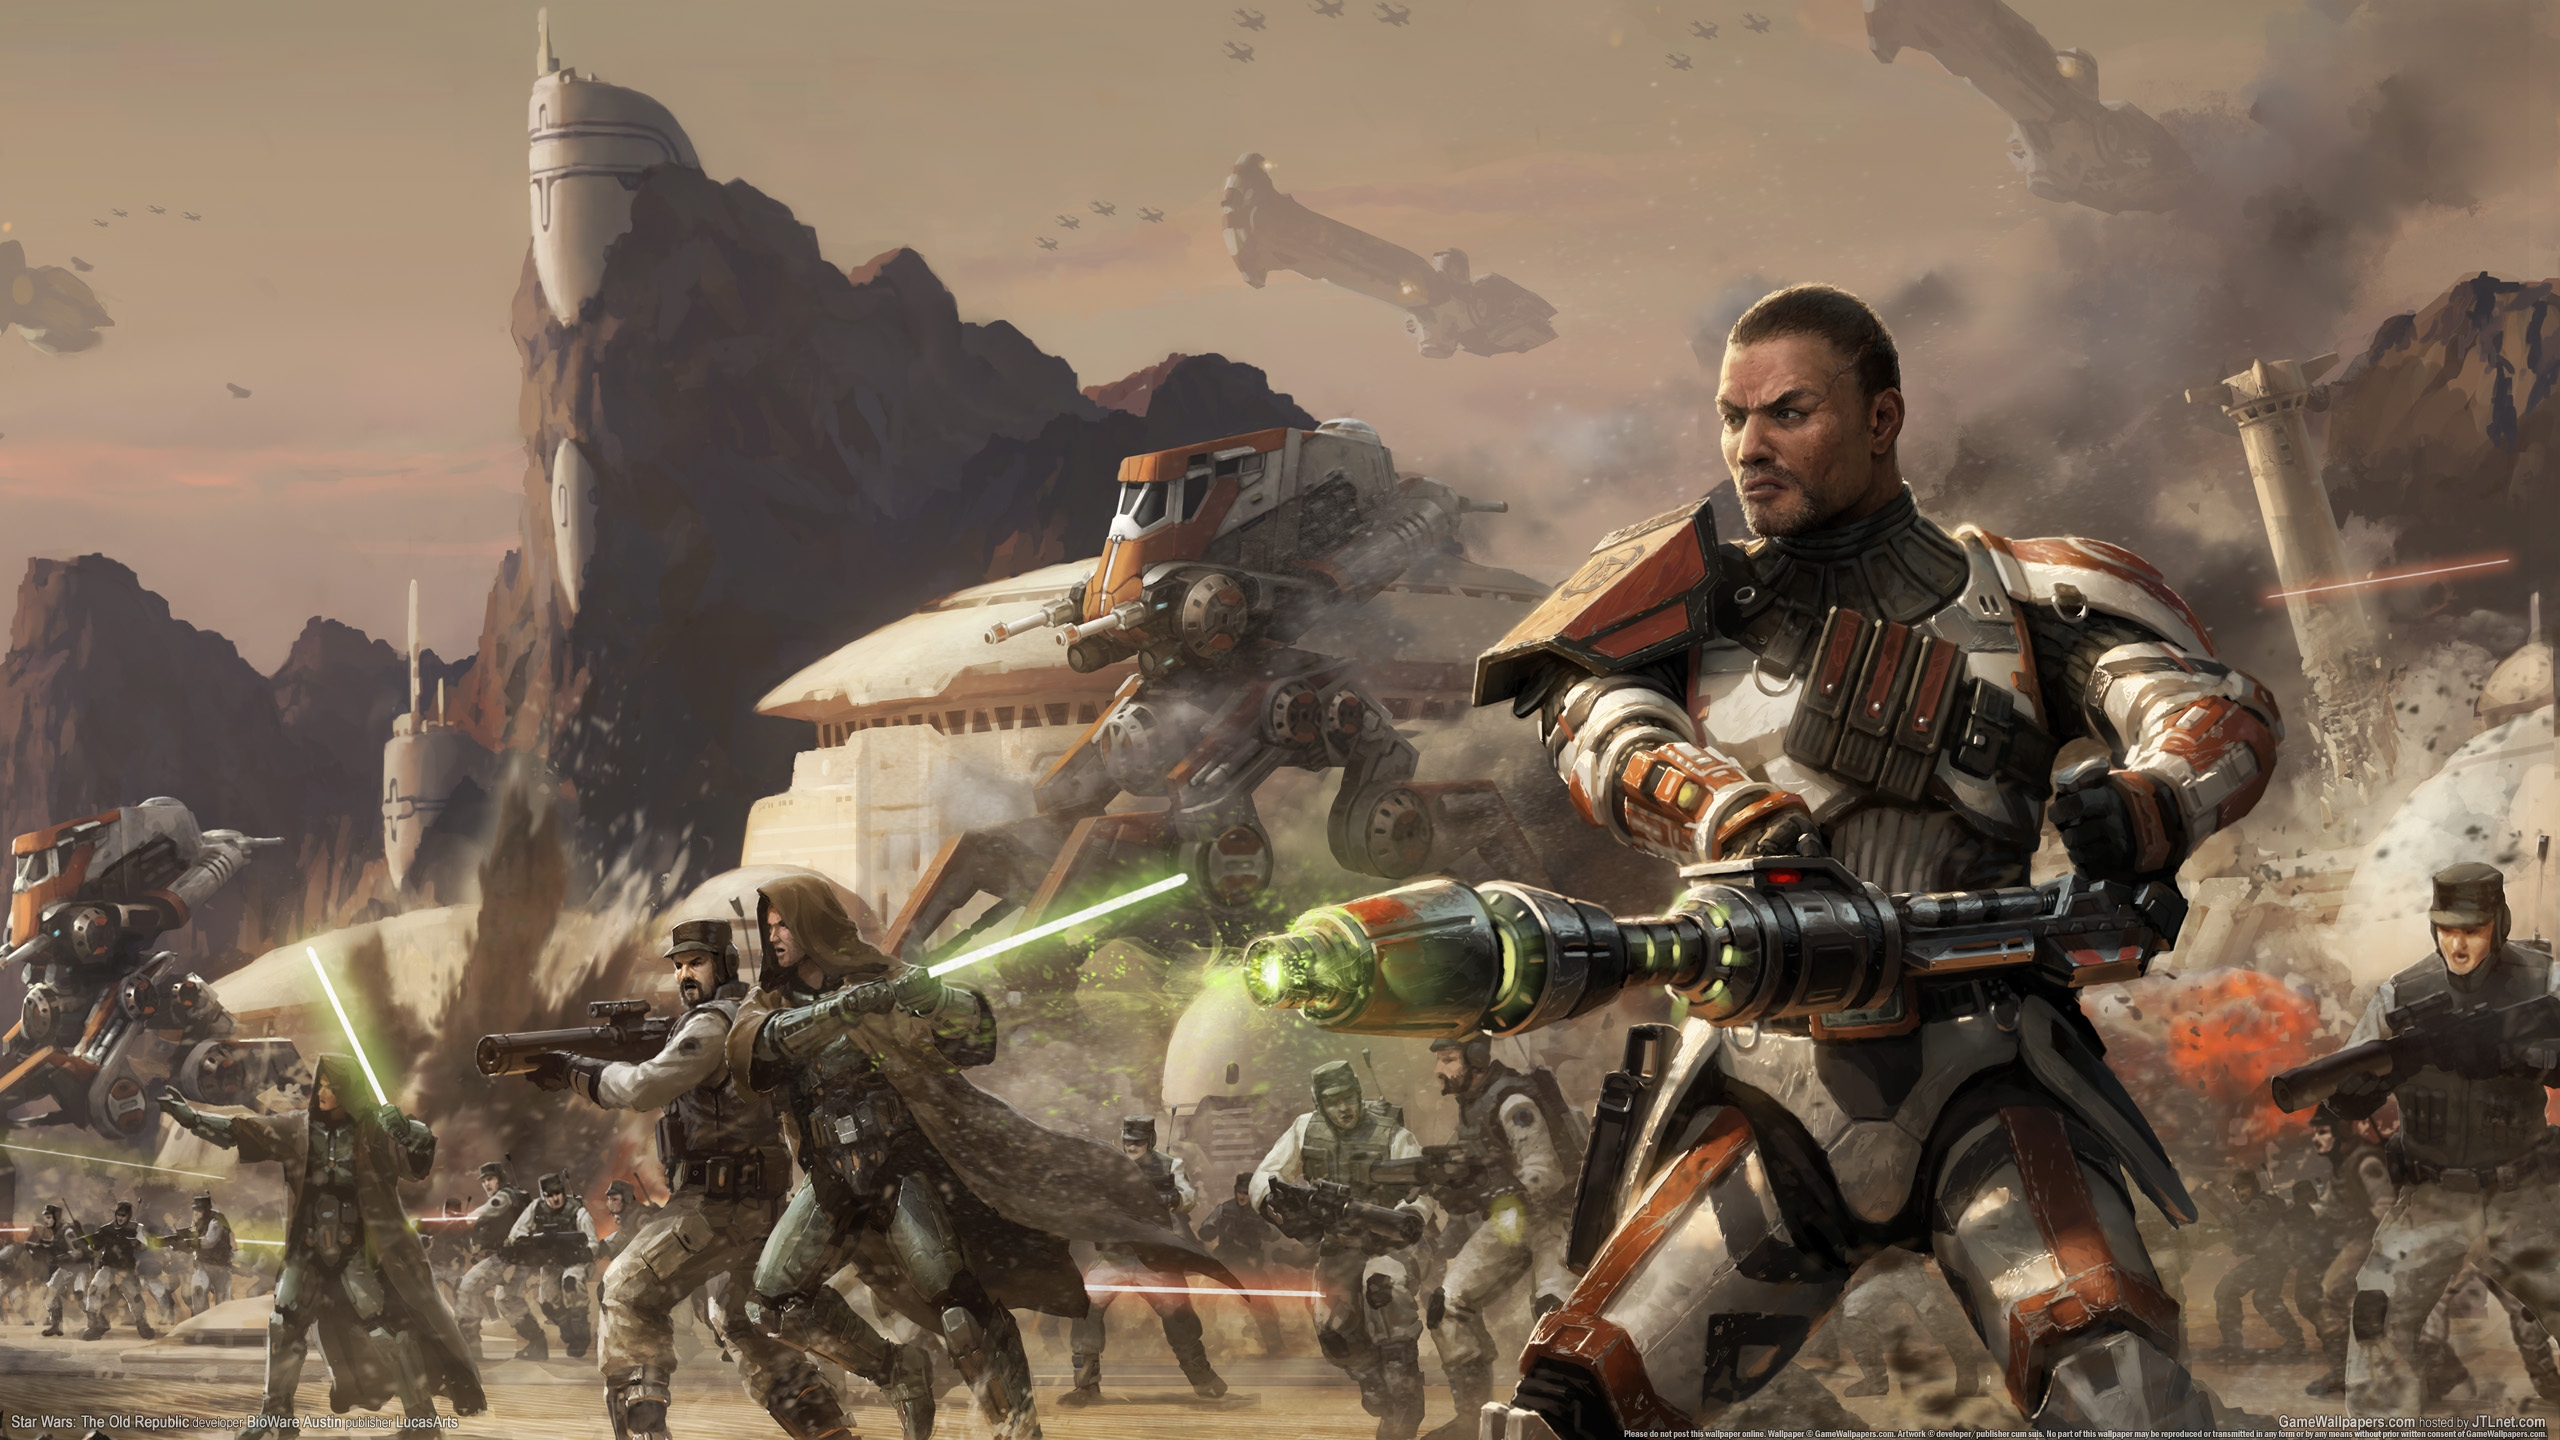 2560x1440 50+ Star Wars: The Old Republic HD Wallpapers and Backgrounds